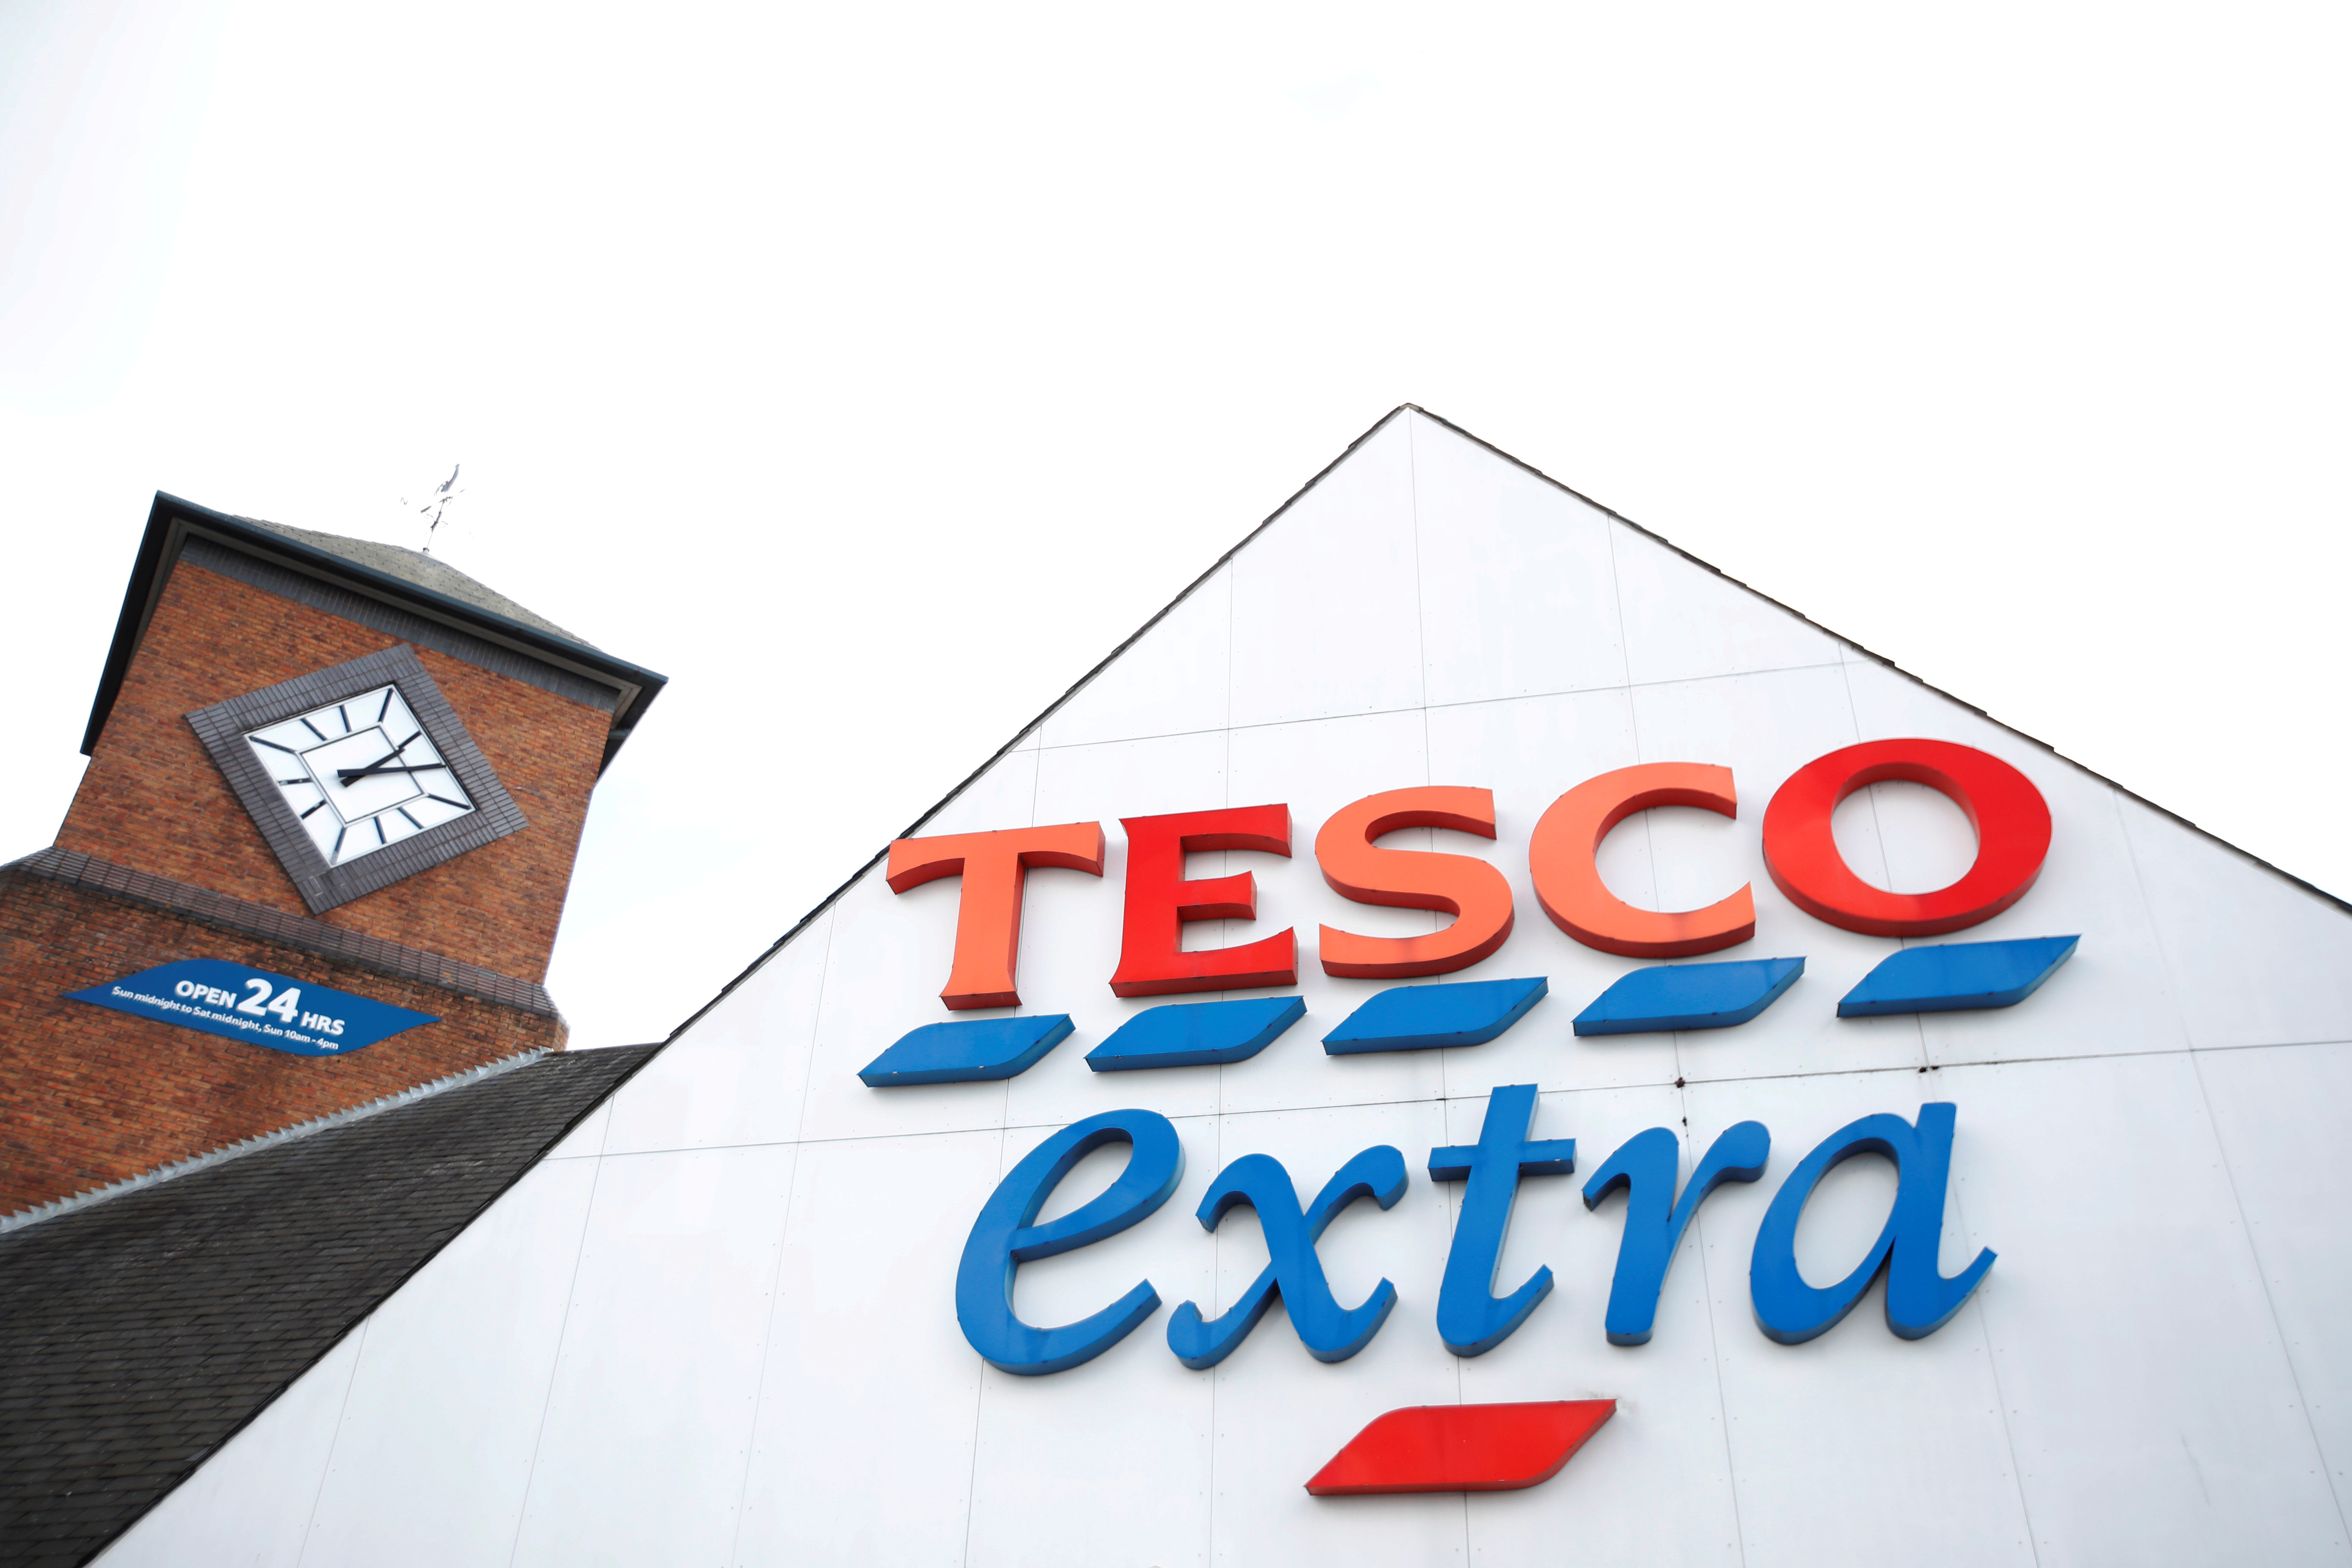 A logo of Tesco is pictured outside a Tesco supermarket in Hatfield